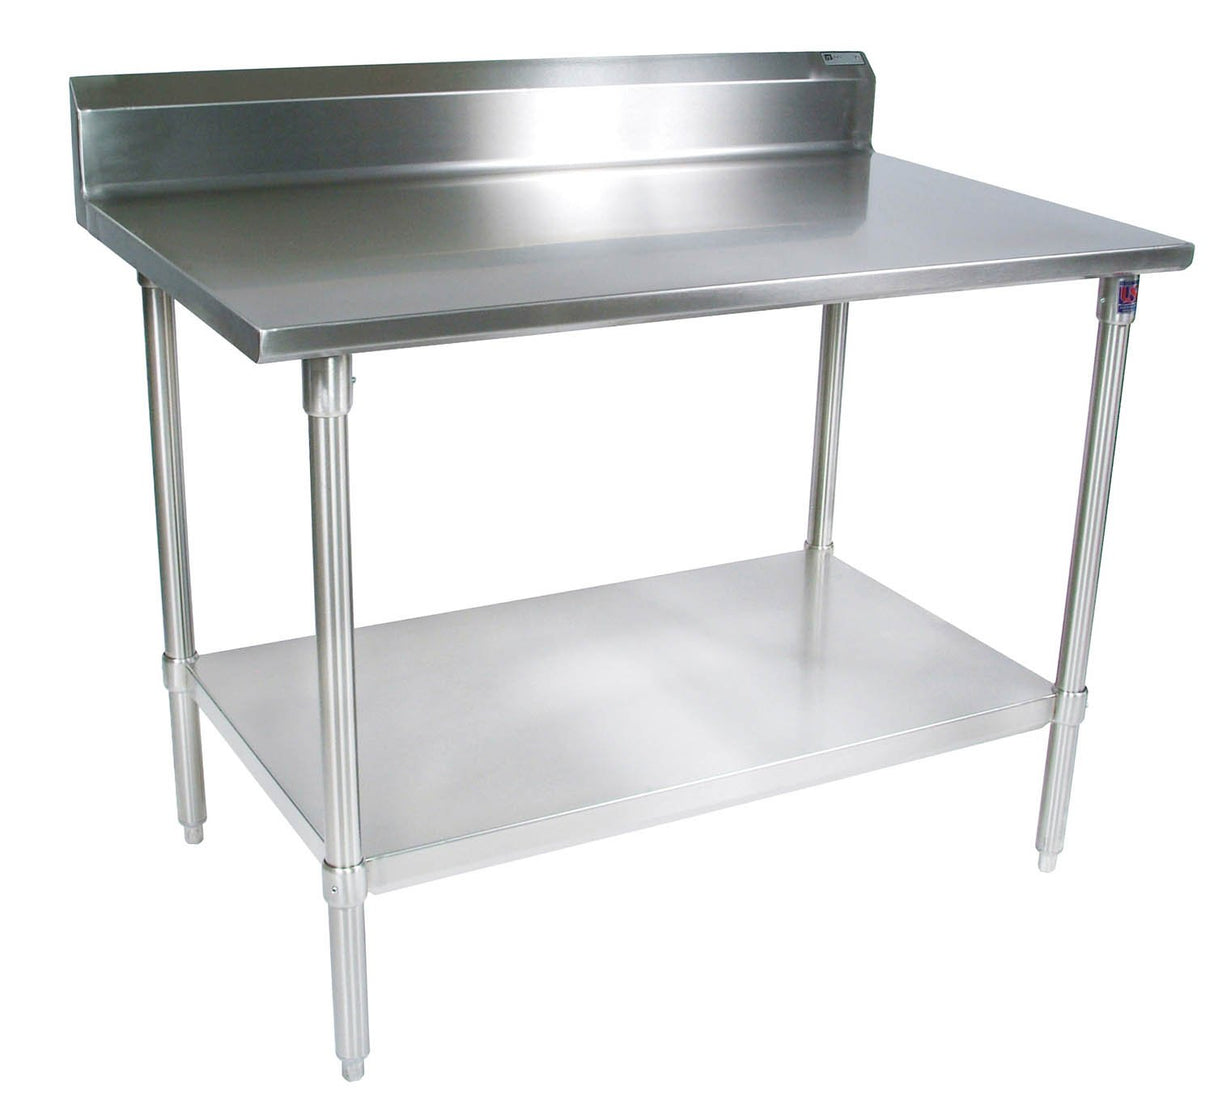 John Boos ST4R5-3636SSK 14 Gauge Stainless Steel Work Table with 5" Rear Riser, Base and Shelf, 36" x